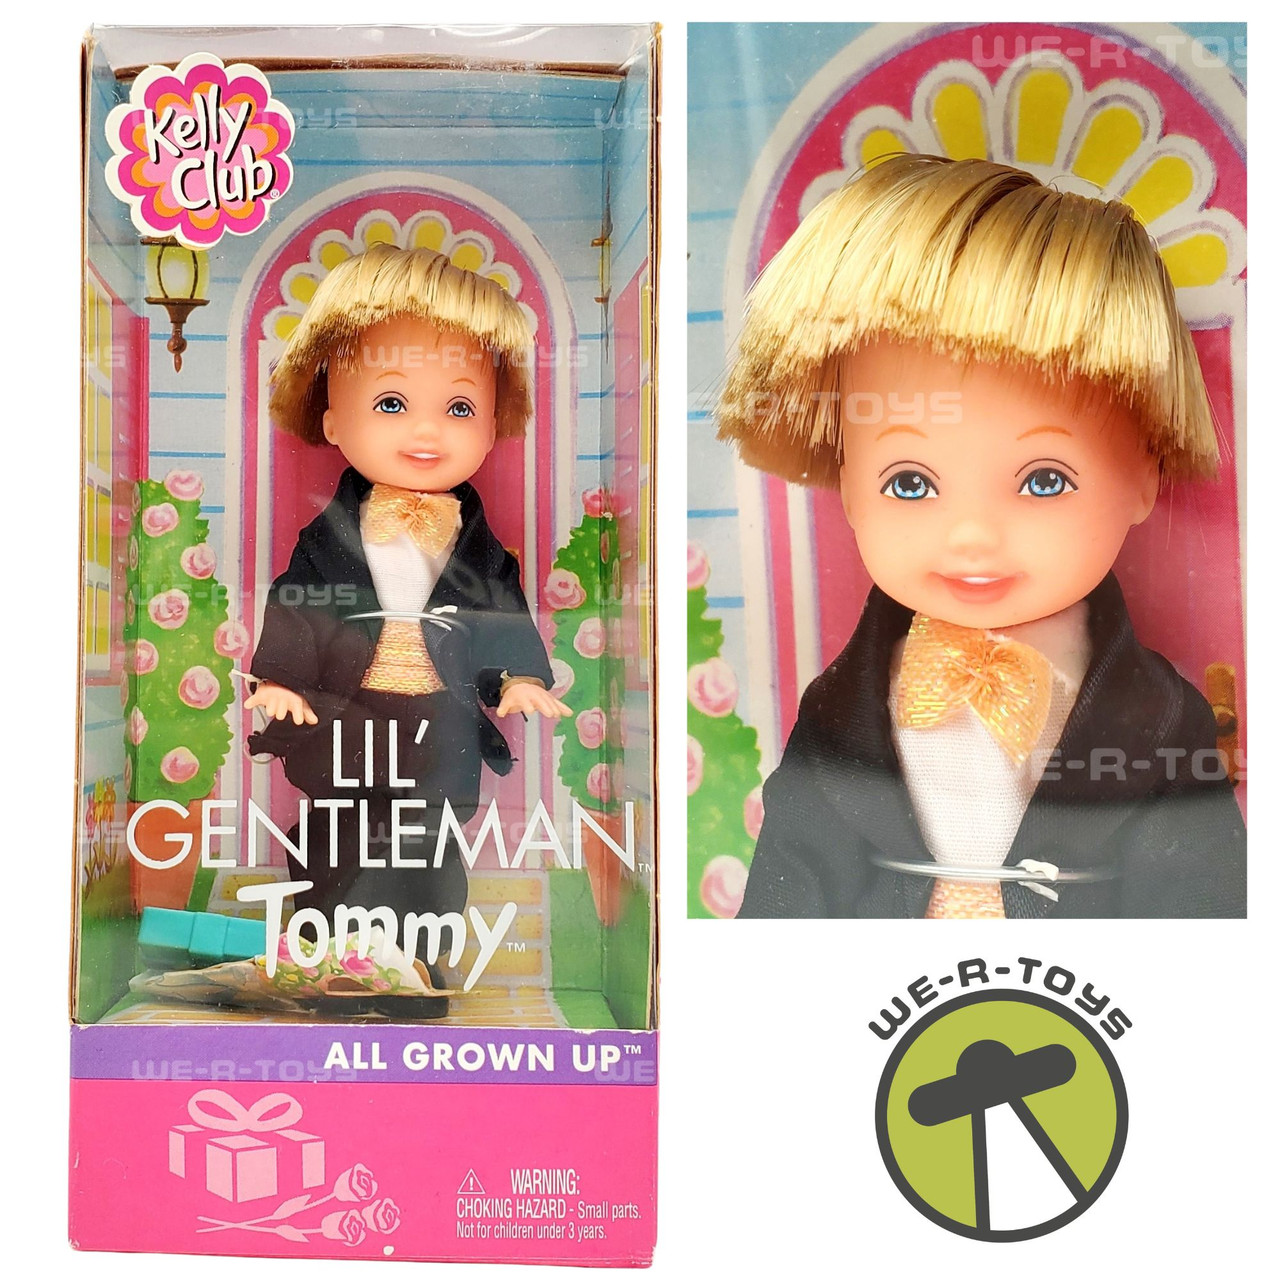 Barbie Kelly Lil' Gentleman Tommy Doll - All Grown Up Series 2002